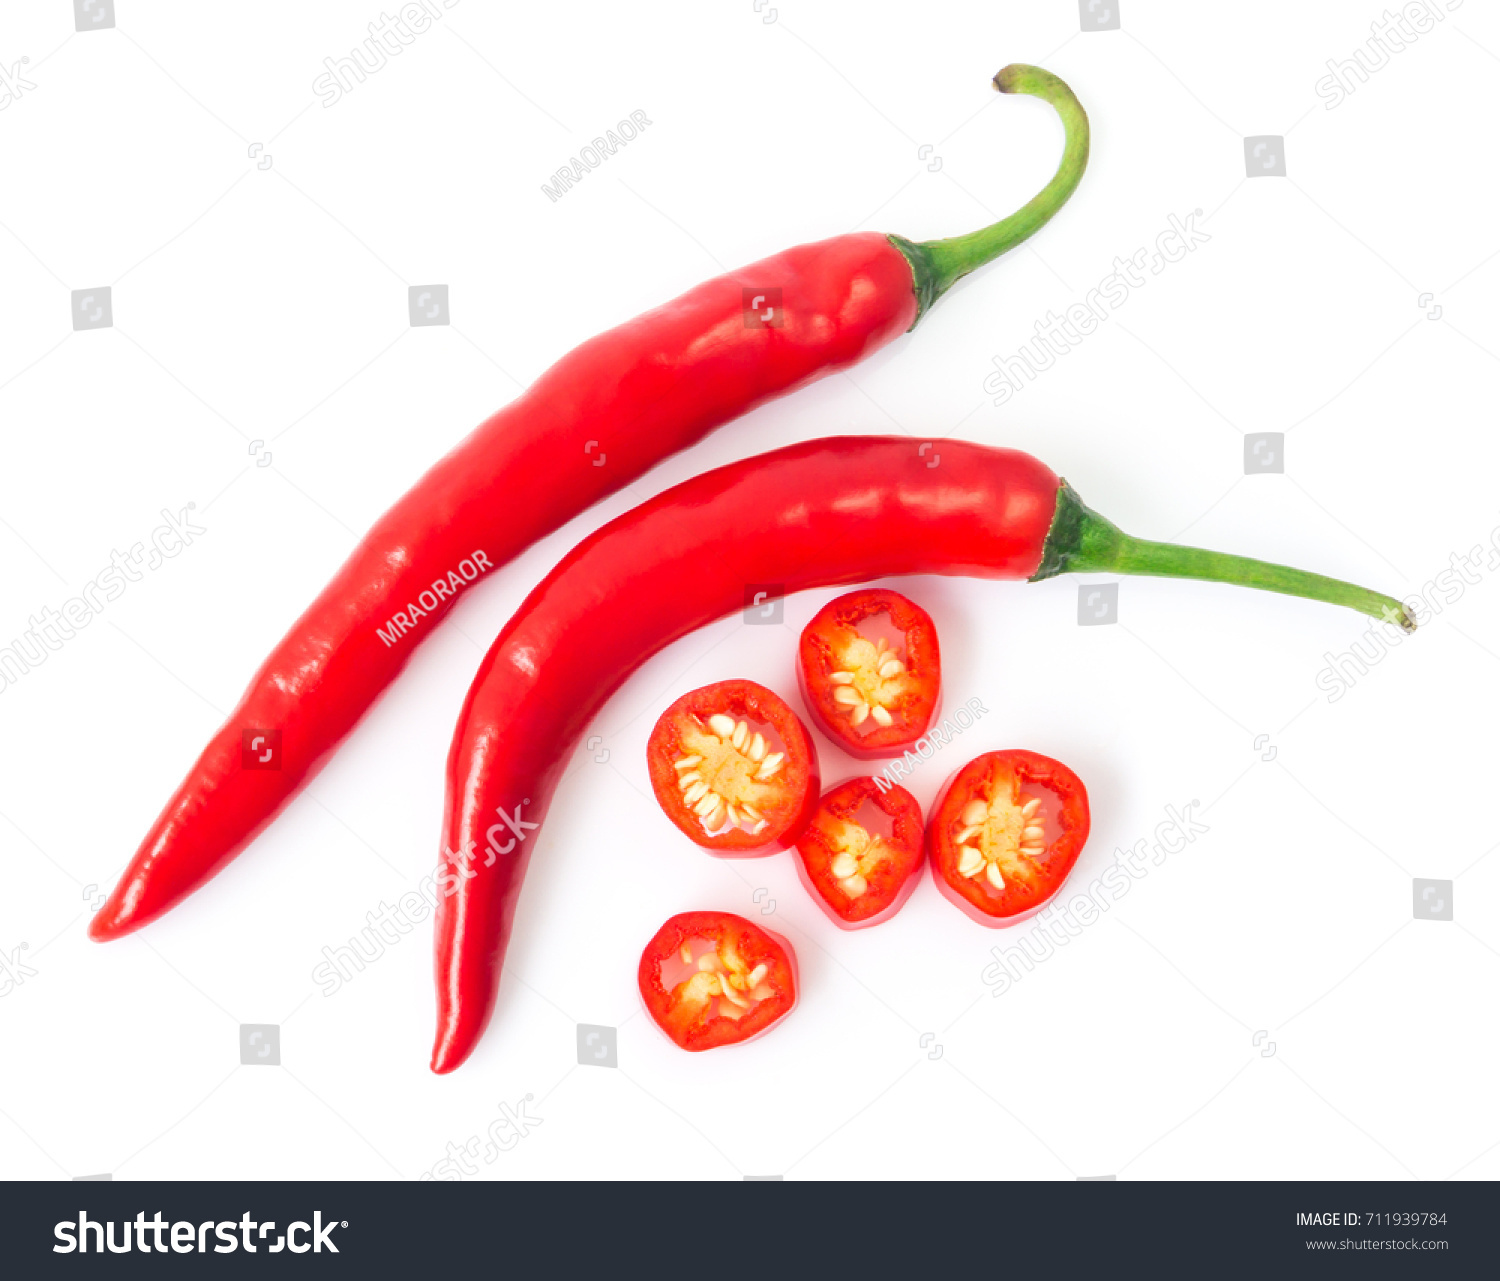 Closeup top view red chili pepper with sliced on white background, raw food ingredient concept #711939784